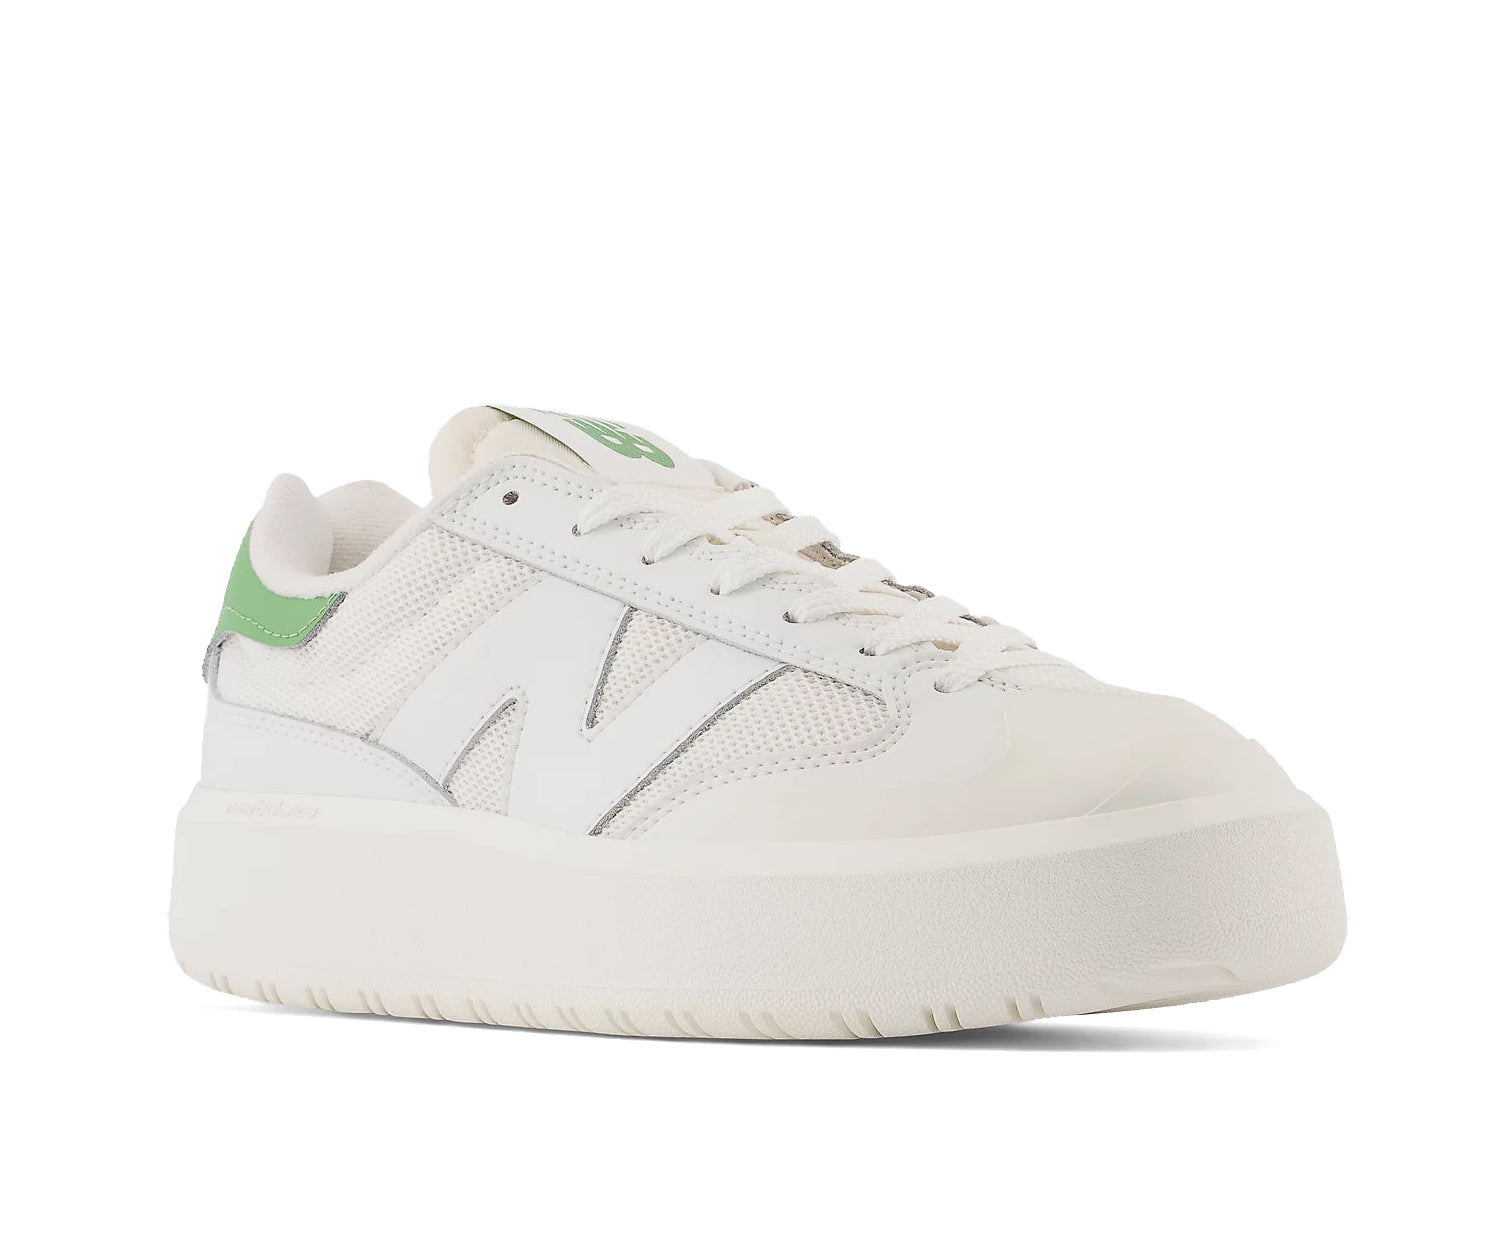 An off-white mixed canvas and leather platform sneaker with green accents from New Balance.An off-white mixed canvas and leather platform sneaker with green accents from New Balance.